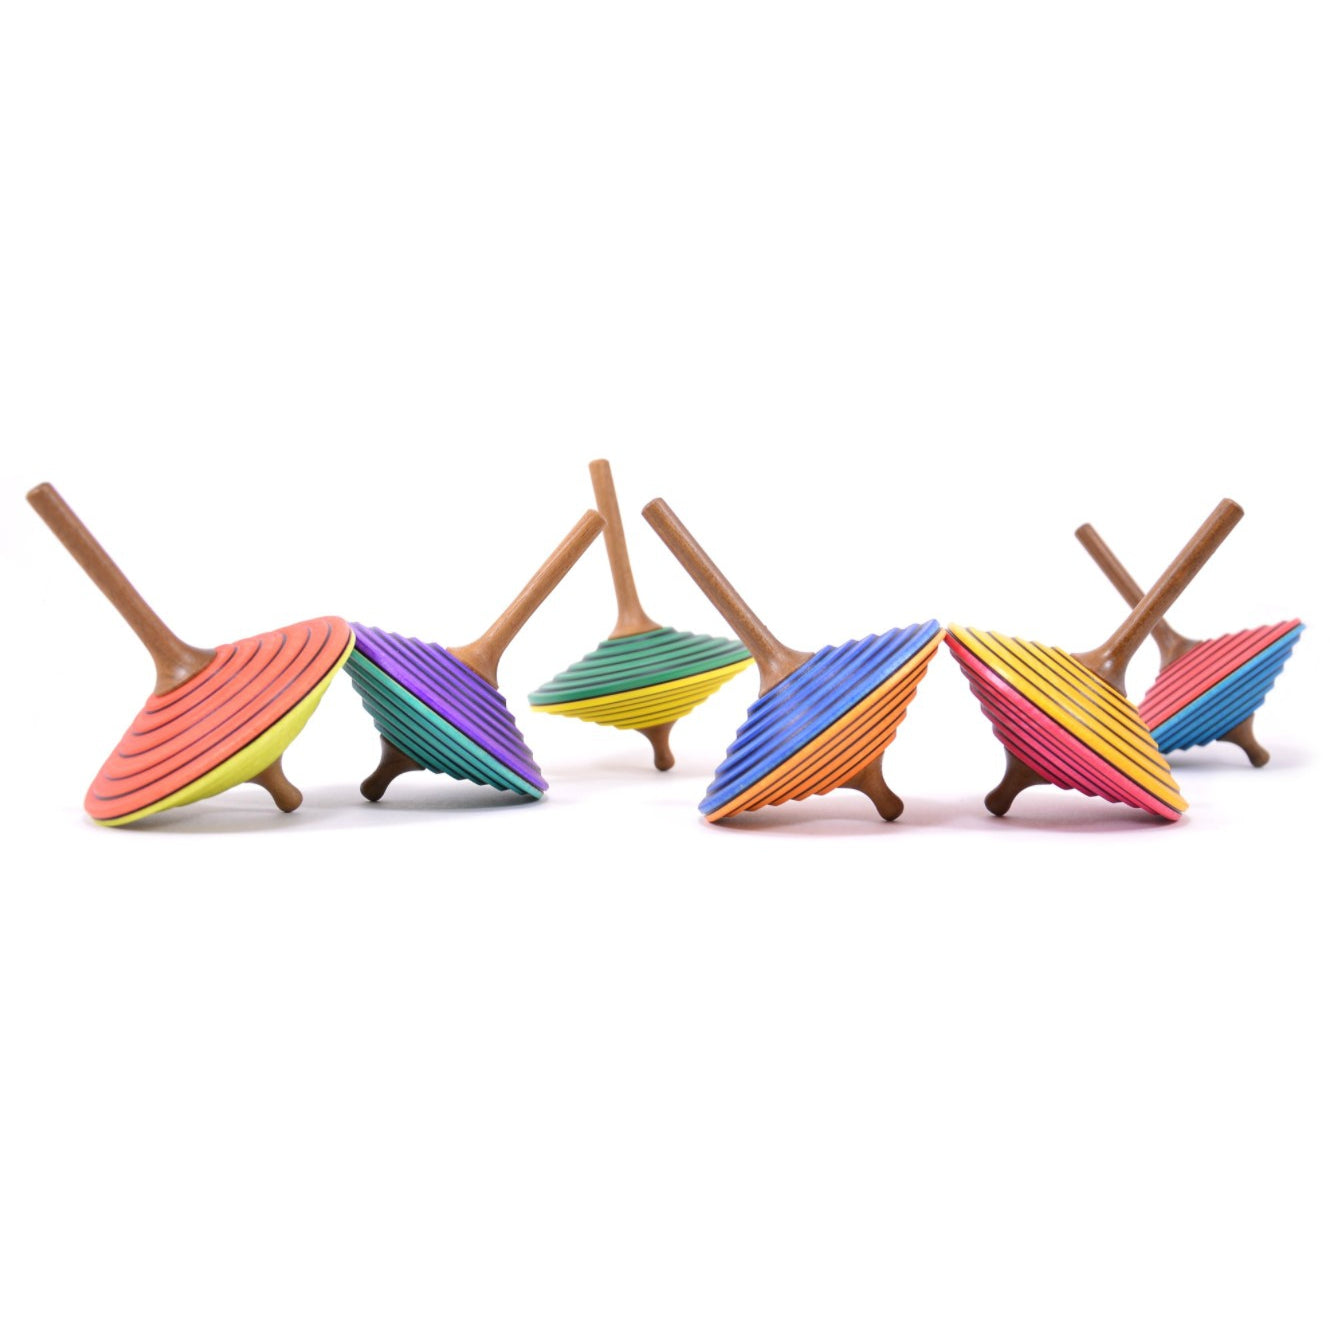 Tukan Bunt Two Handed Spinning Top by Mader